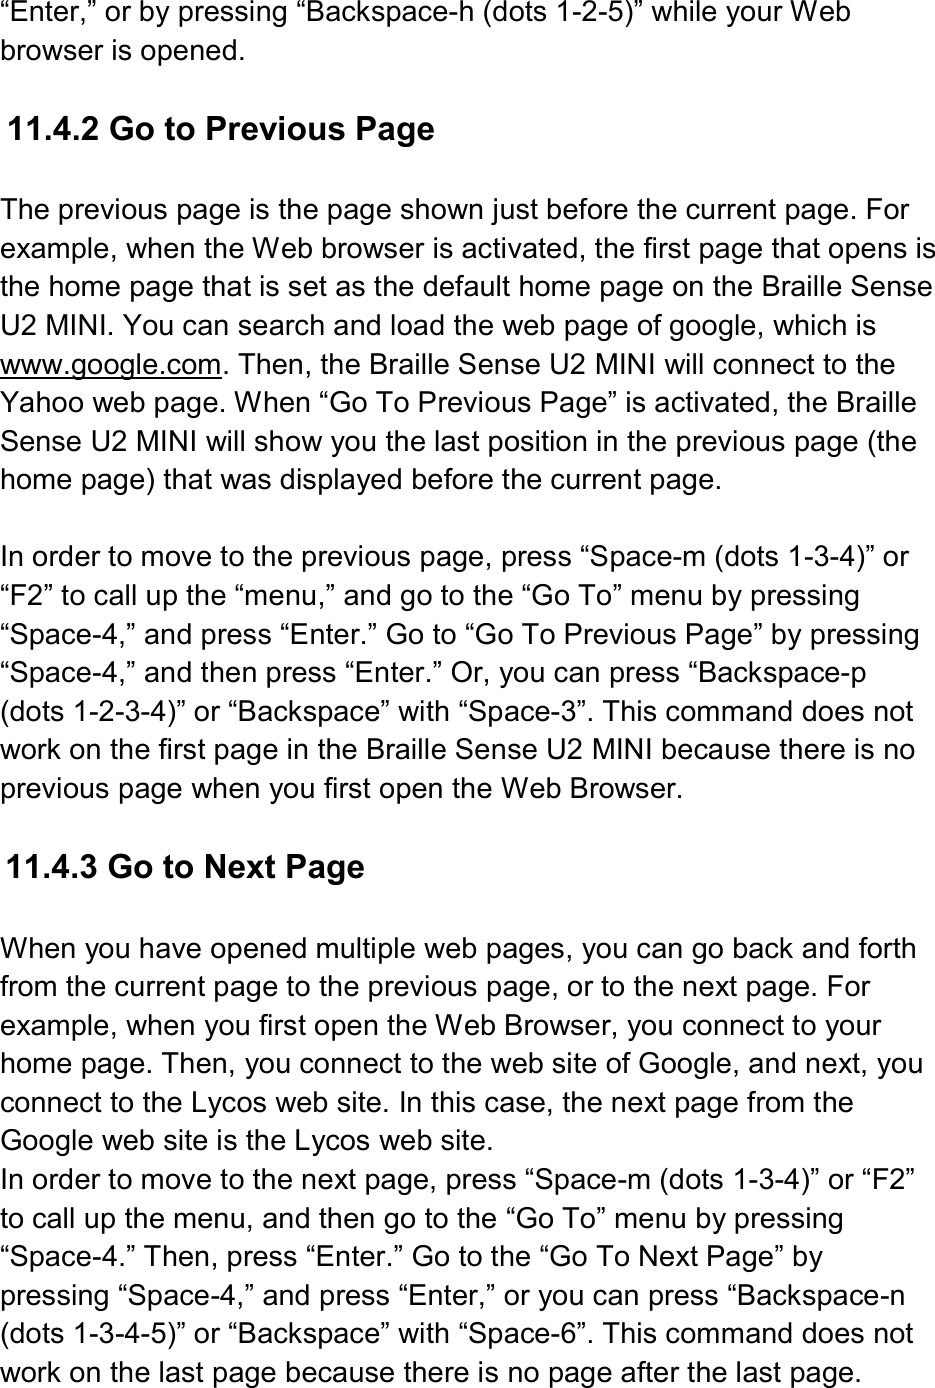  “Enter,” or by pressing “Backspace-h (dots 1-2-5)” while your Web browser is opened.  11.4.2 Go to Previous Page    The previous page is the page shown just before the current page. For example, when the Web browser is activated, the first page that opens is the home page that is set as the default home page on the Braille Sense U2 MINI. You can search and load the web page of google, which is www.google.com. Then, the Braille Sense U2 MINI will connect to the Yahoo web page. When “Go To Previous Page” is activated, the Braille Sense U2 MINI will show you the last position in the previous page (the home page) that was displayed before the current page.  In order to move to the previous page, press “Space-m (dots 1-3-4)” or “F2” to call up the “menu,” and go to the “Go To” menu by pressing “Space-4,” and press “Enter.” Go to “Go To Previous Page” by pressing “Space-4,” and then press “Enter.” Or, you can press “Backspace-p (dots 1-2-3-4)” or “Backspace” with “Space-3”. This command does not work on the first page in the Braille Sense U2 MINI because there is no previous page when you first open the Web Browser.  11.4.3 Go to Next Page  When you have opened multiple web pages, you can go back and forth from the current page to the previous page, or to the next page. For example, when you first open the Web Browser, you connect to your home page. Then, you connect to the web site of Google, and next, you connect to the Lycos web site. In this case, the next page from the Google web site is the Lycos web site.   In order to move to the next page, press “Space-m (dots 1-3-4)” or “F2” to call up the menu, and then go to the “Go To” menu by pressing “Space-4.” Then, press “Enter.” Go to the “Go To Next Page” by pressing “Space-4,” and press “Enter,” or you can press “Backspace-n (dots 1-3-4-5)” or “Backspace” with “Space-6”. This command does not work on the last page because there is no page after the last page. 